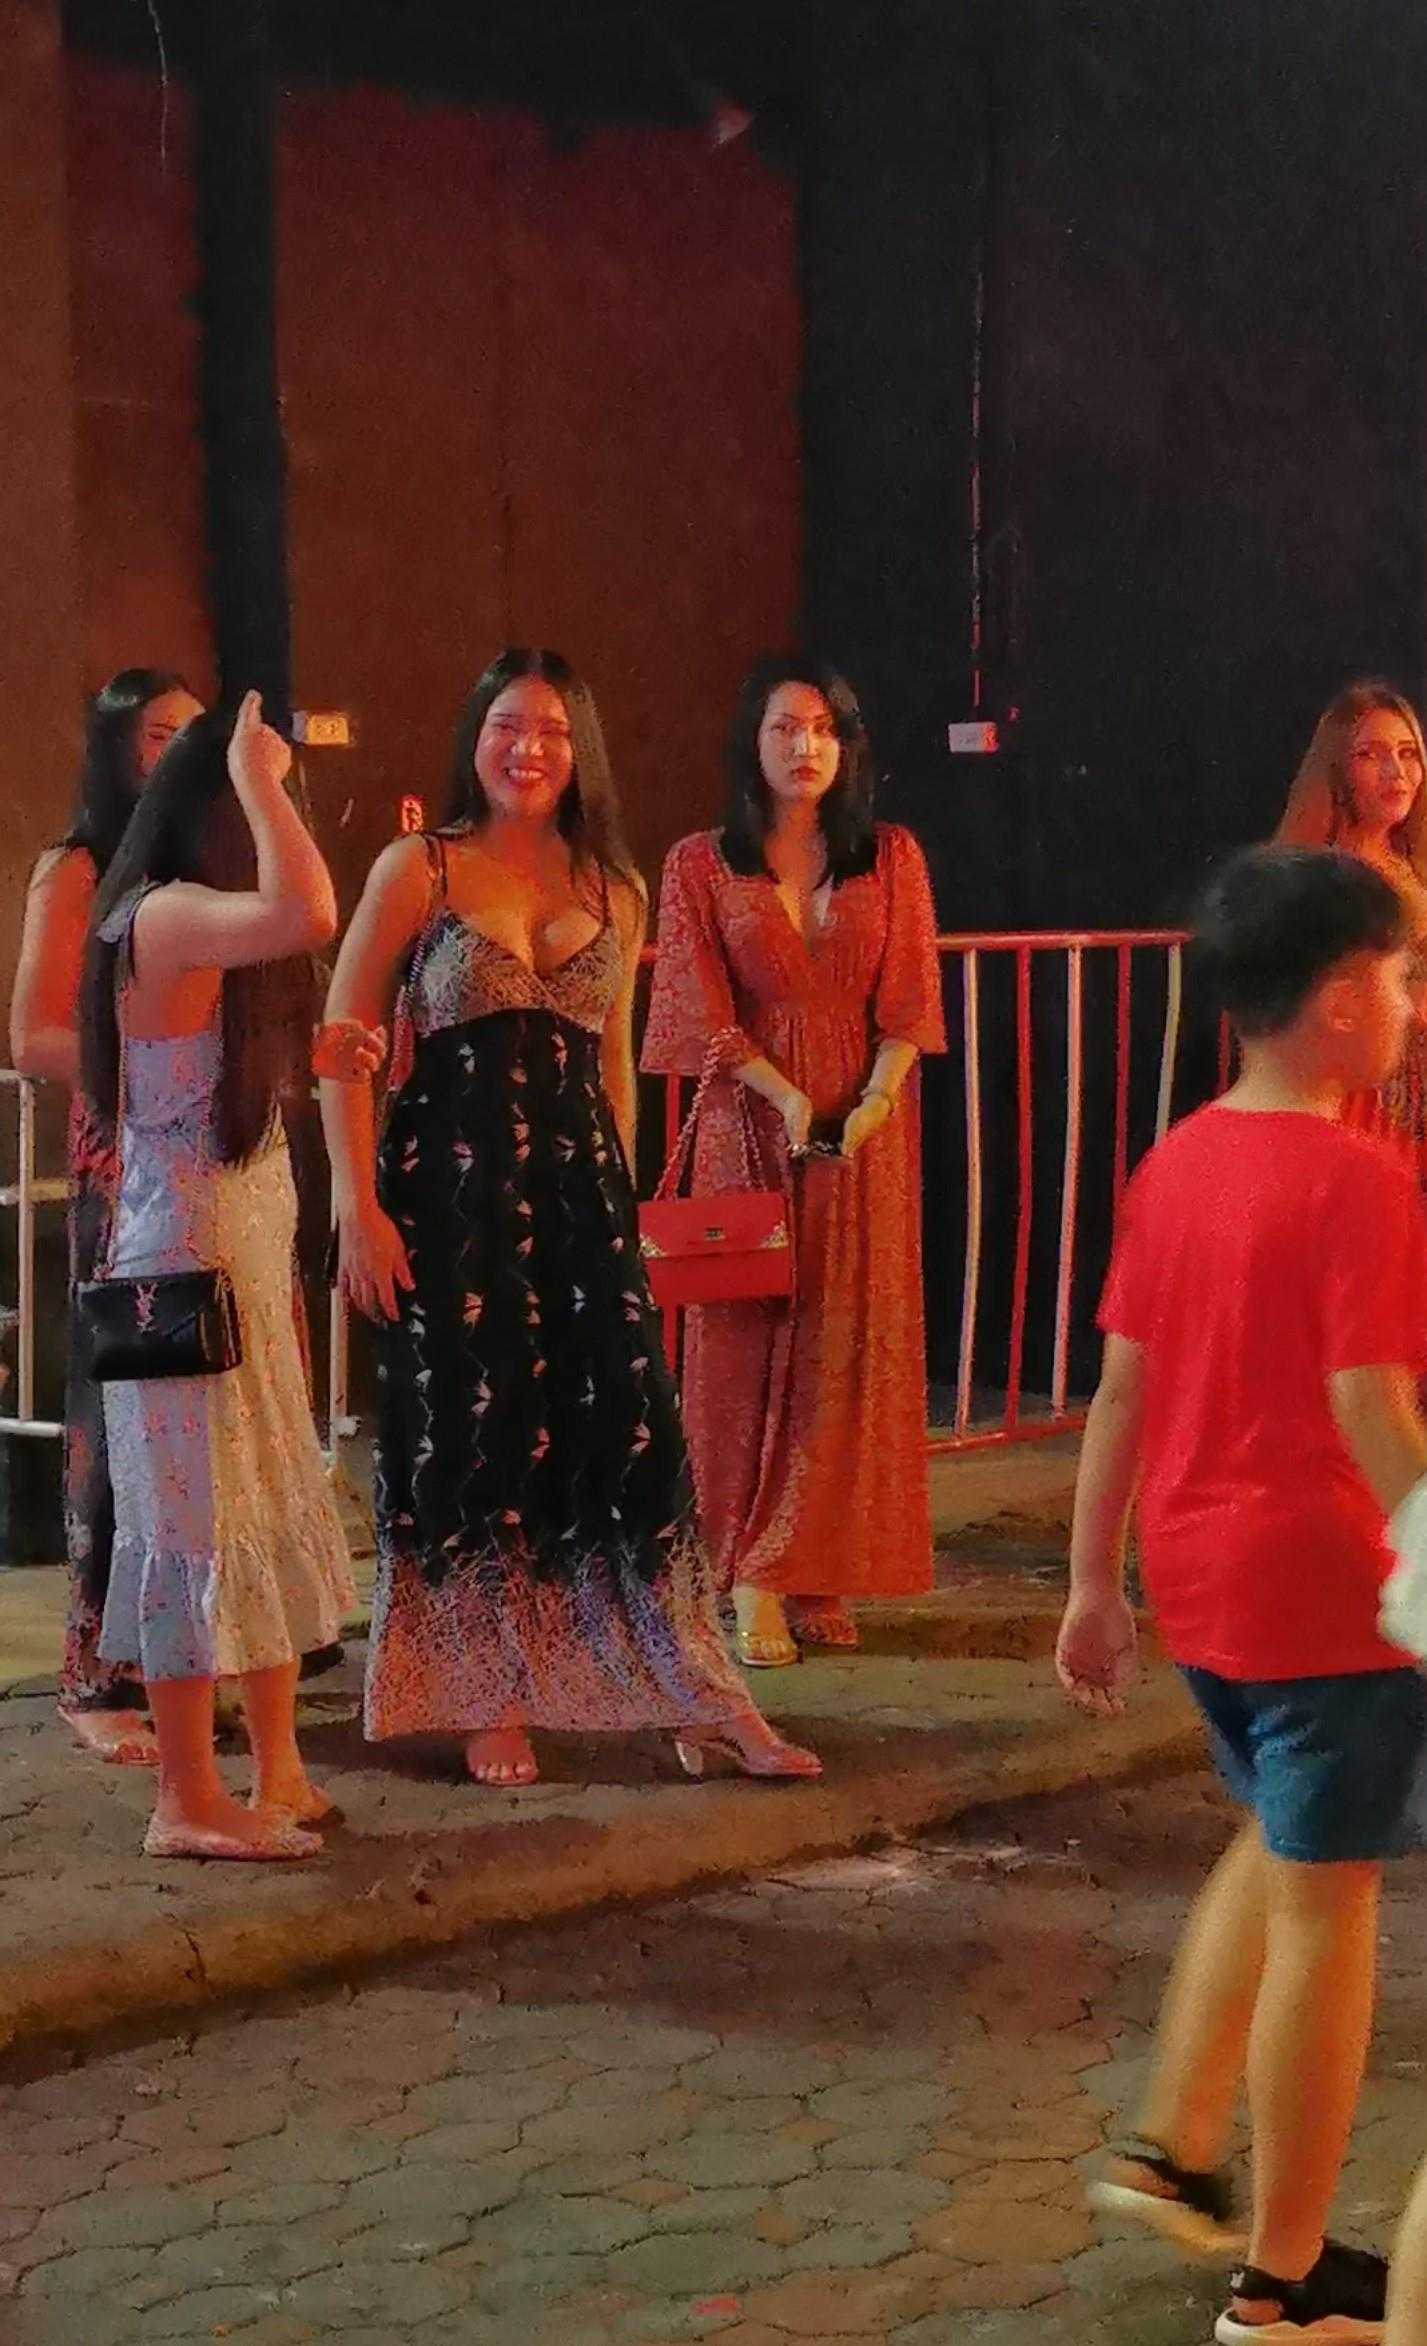 Pattaya-Pattaya prostitutes, male prostitutes, transsexual streets, erotic encounters that make your legs go weak